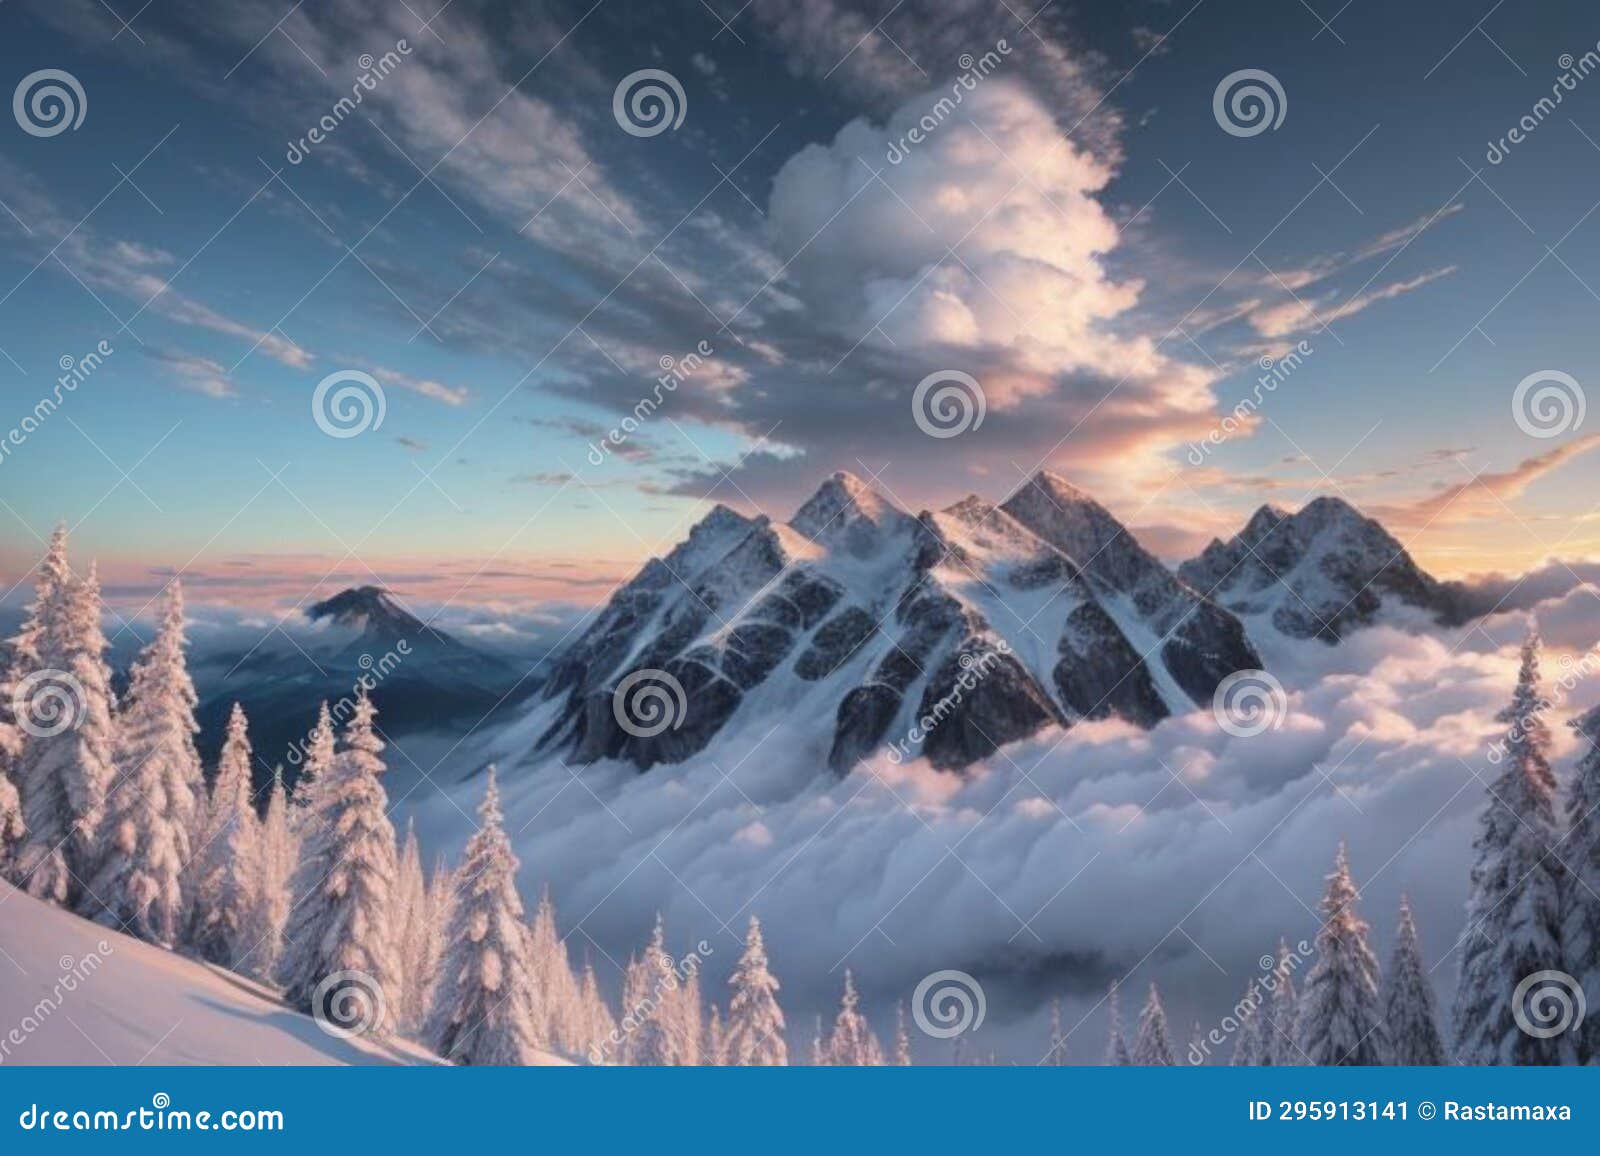 beautiful landscape with a winter theme, clouds, forest, mountains, ai generate